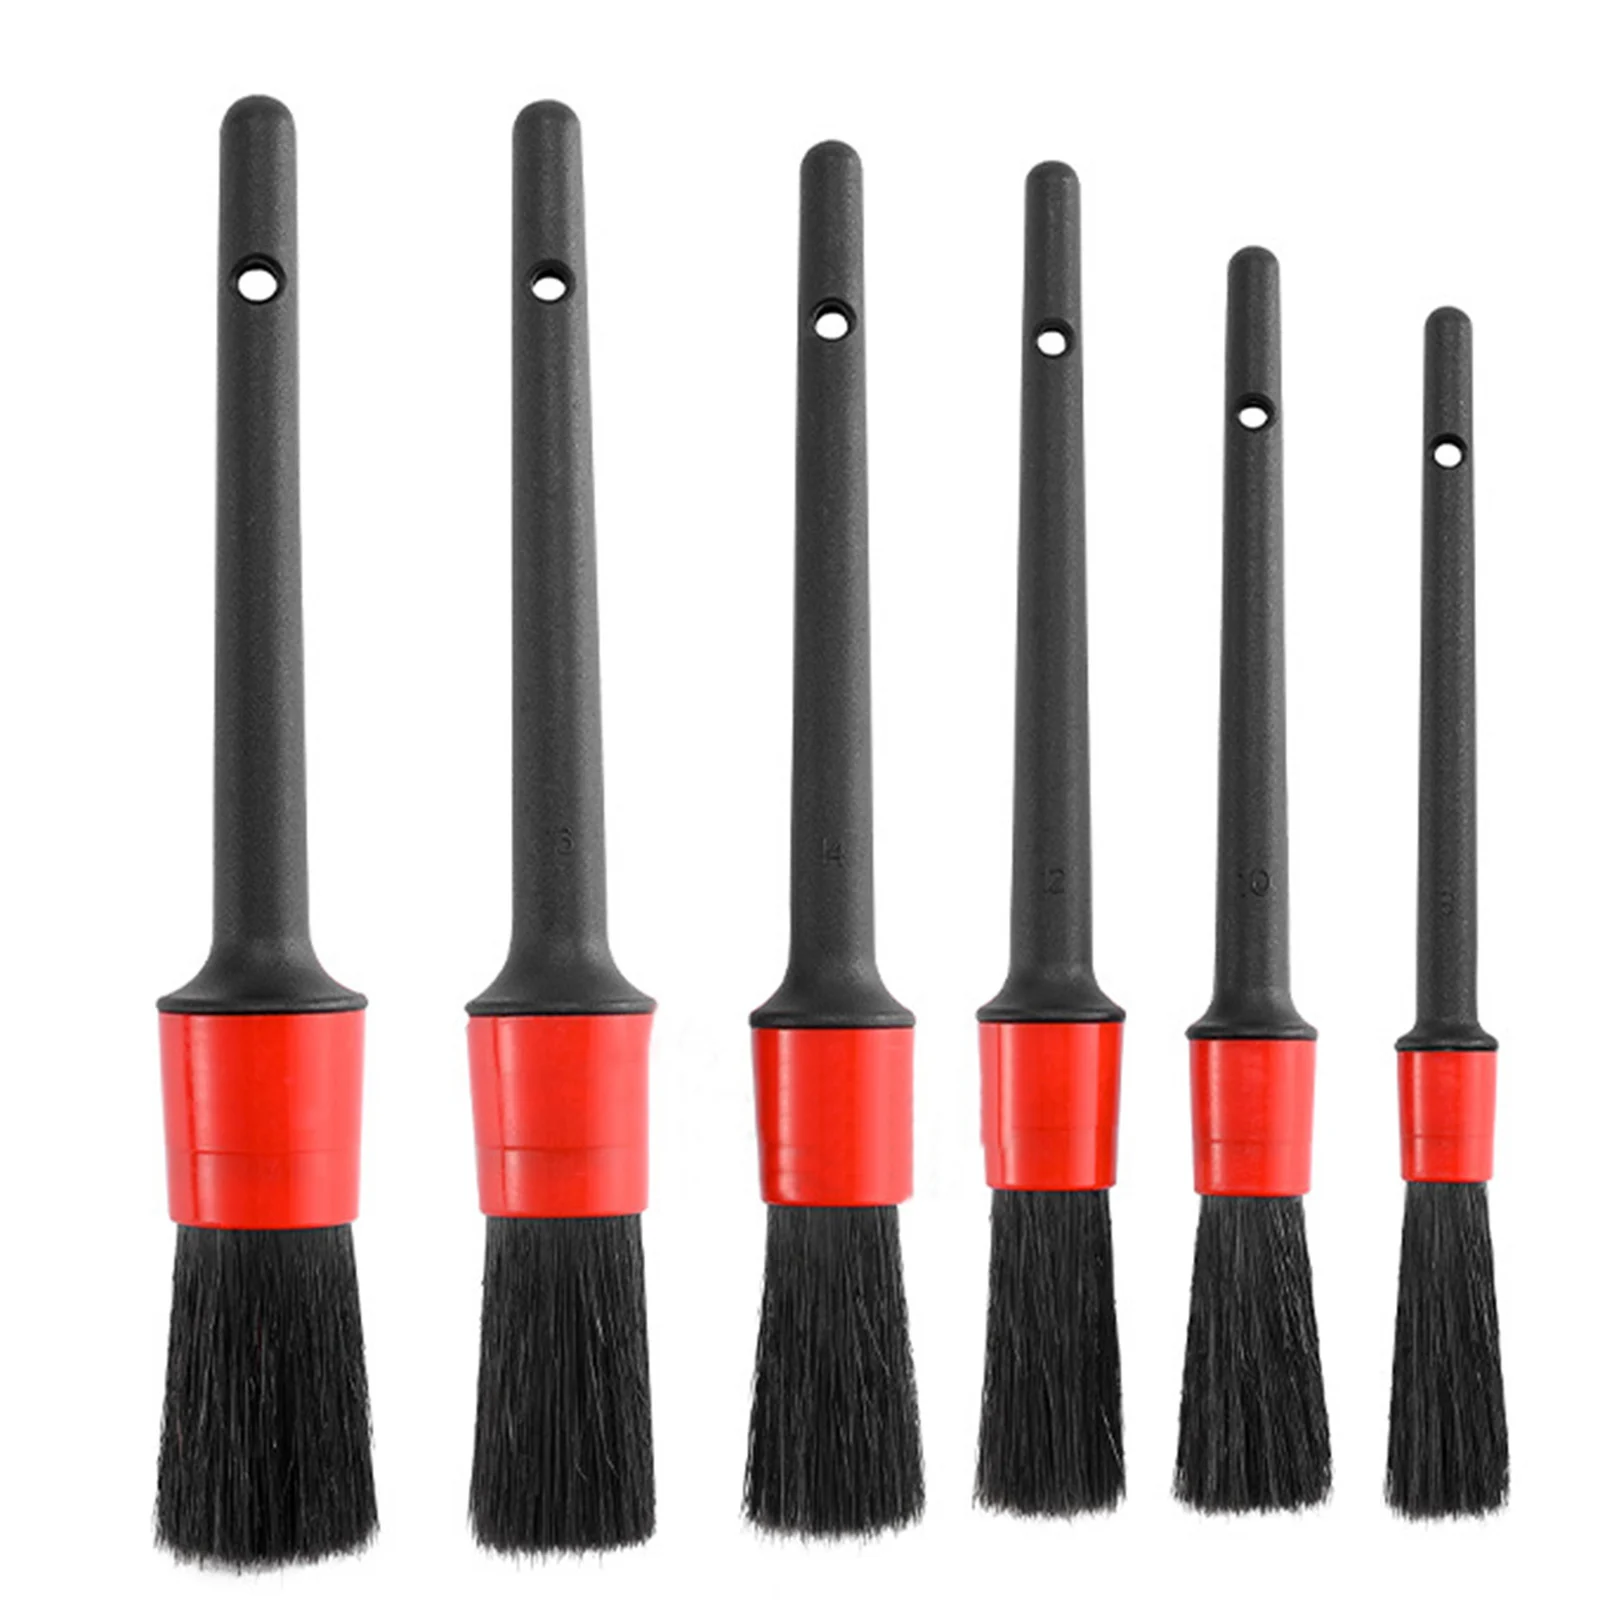 

Car Detailing Brush Set 6pcs Natural Boar Hair Automobile Detail Brushes for Cleaning Engine Air Vents Dashboard